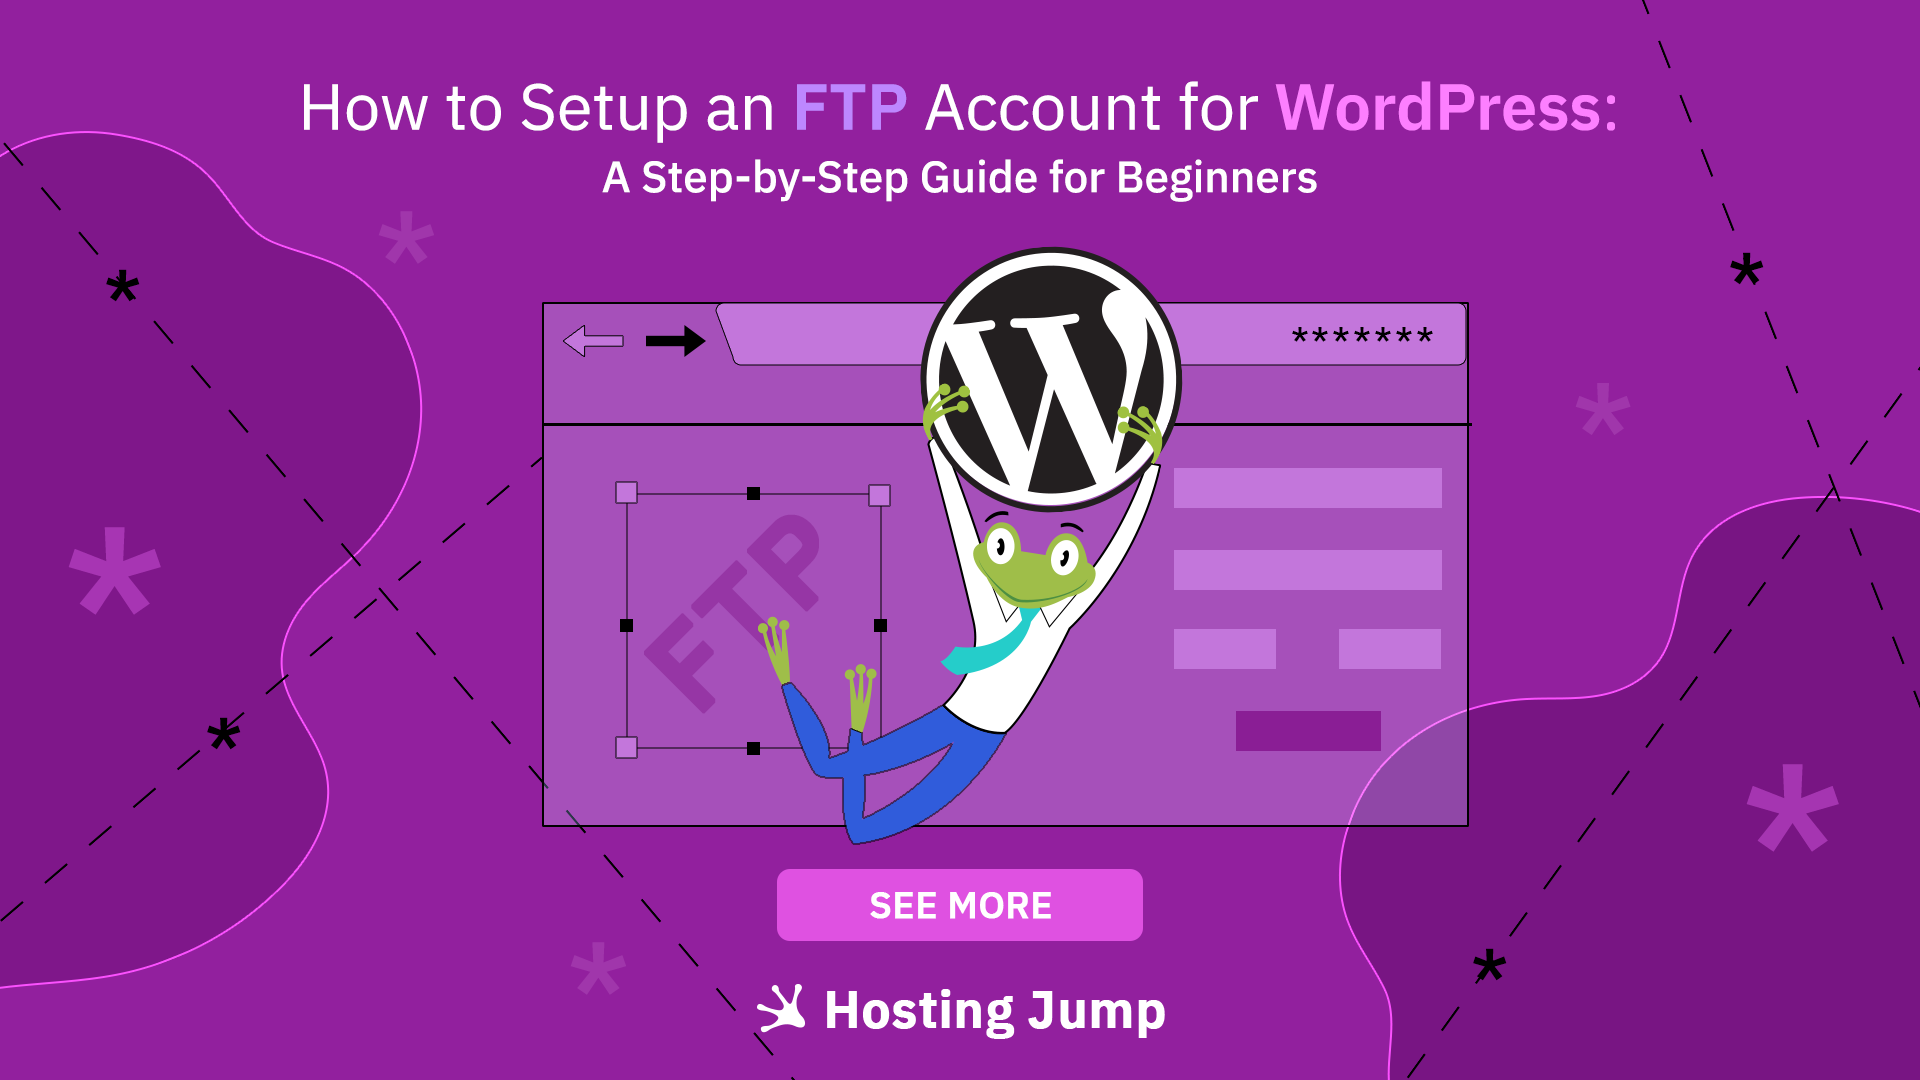 How to Setup an FTP Account for WordPress: A Step-by-Step Guide for Beginners